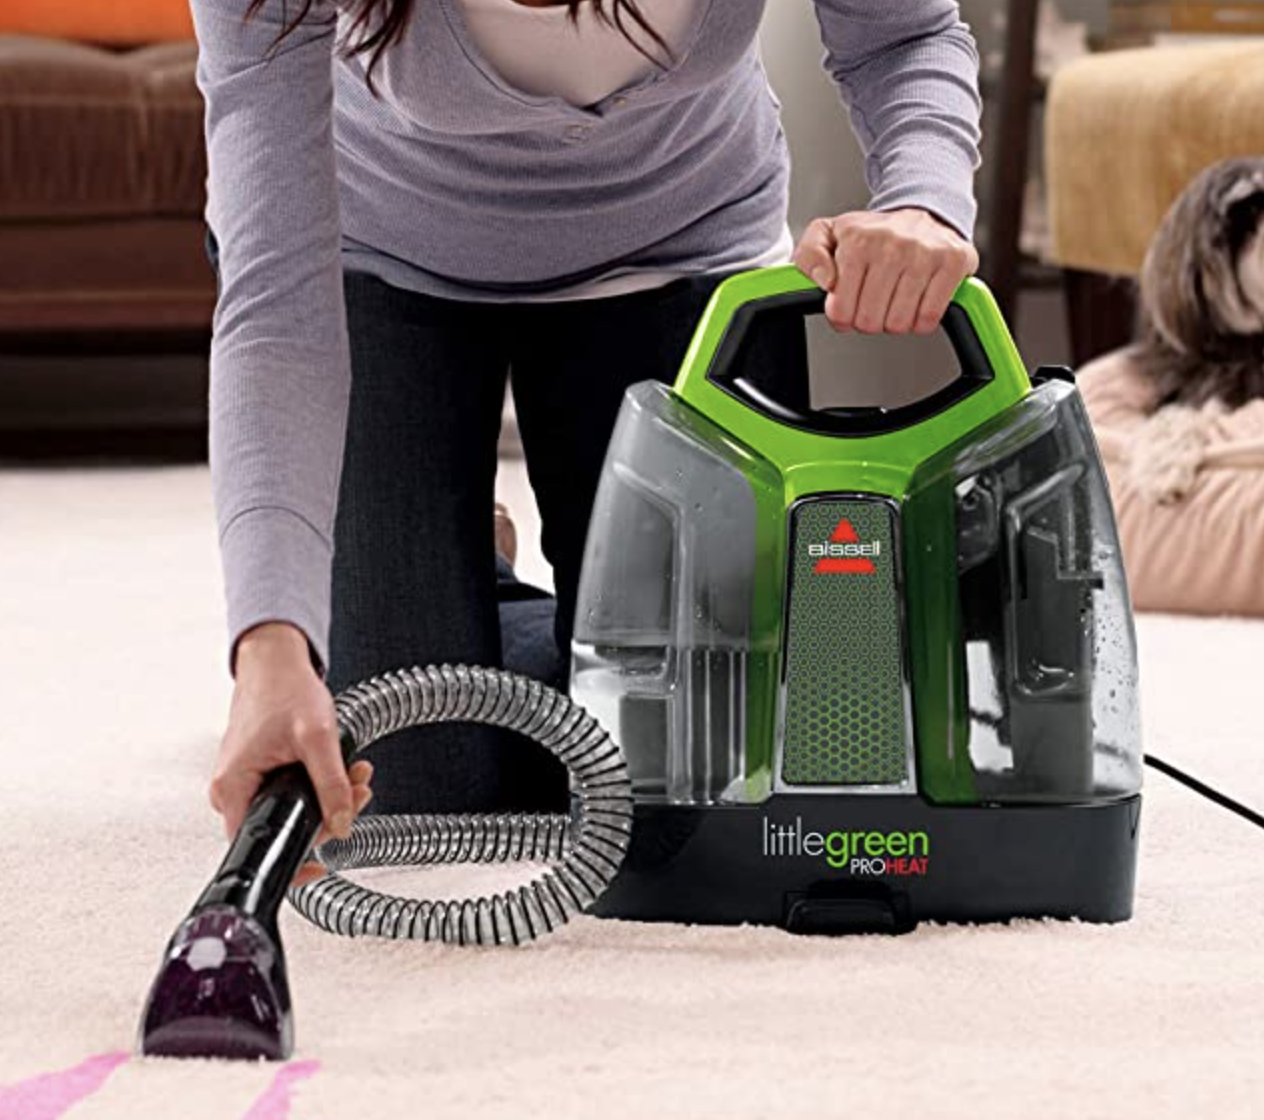 a person using the cleaner on their rug